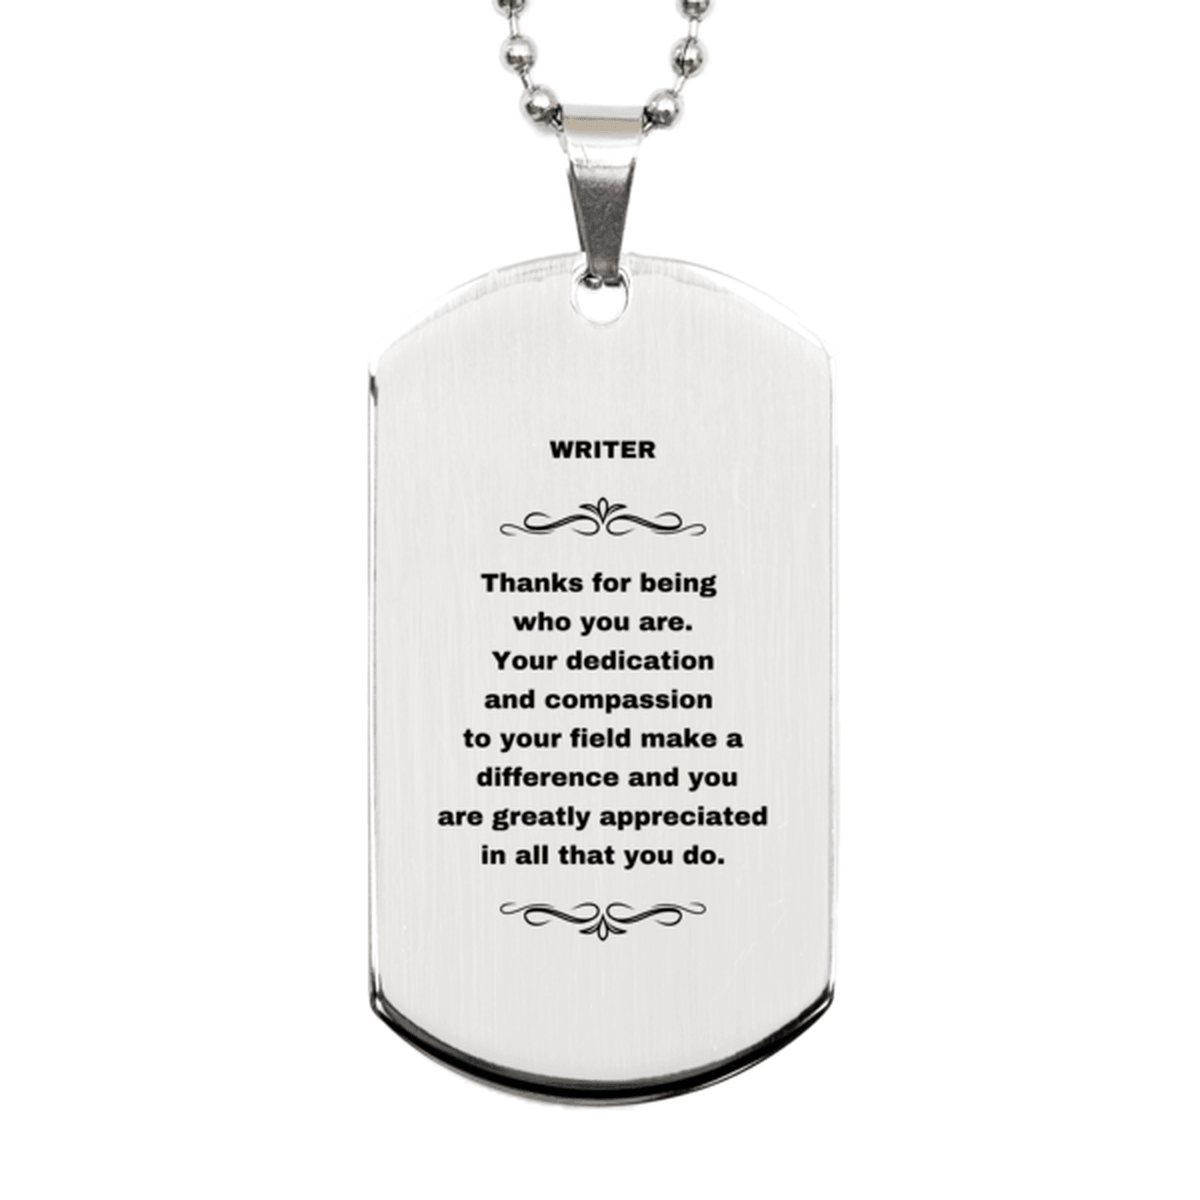 Writer Silver Engraved Dog Tag Necklace - Thanks for being who you are - Birthday Christmas Jewelry Gifts Coworkers Colleague Boss - Mallard Moon Gift Shop